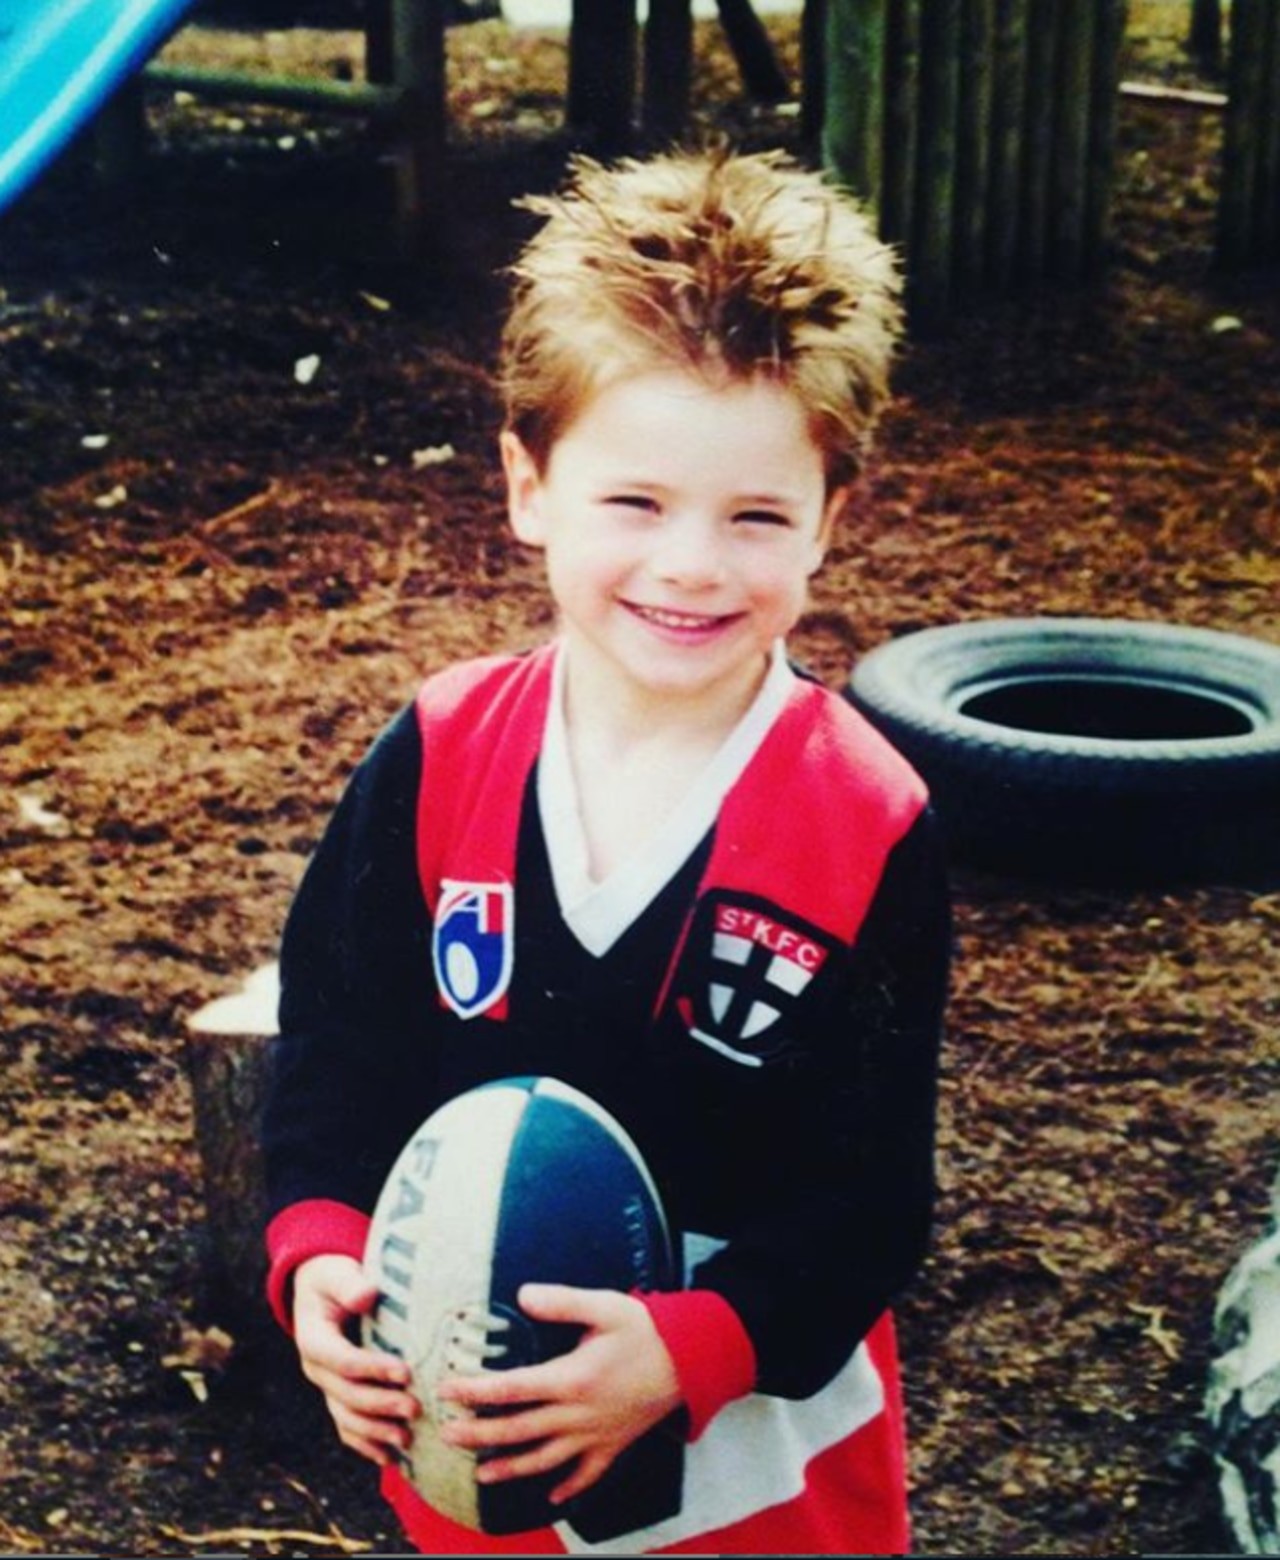 St Kilda player Jack Sinclair as a child. Picture: Instagram